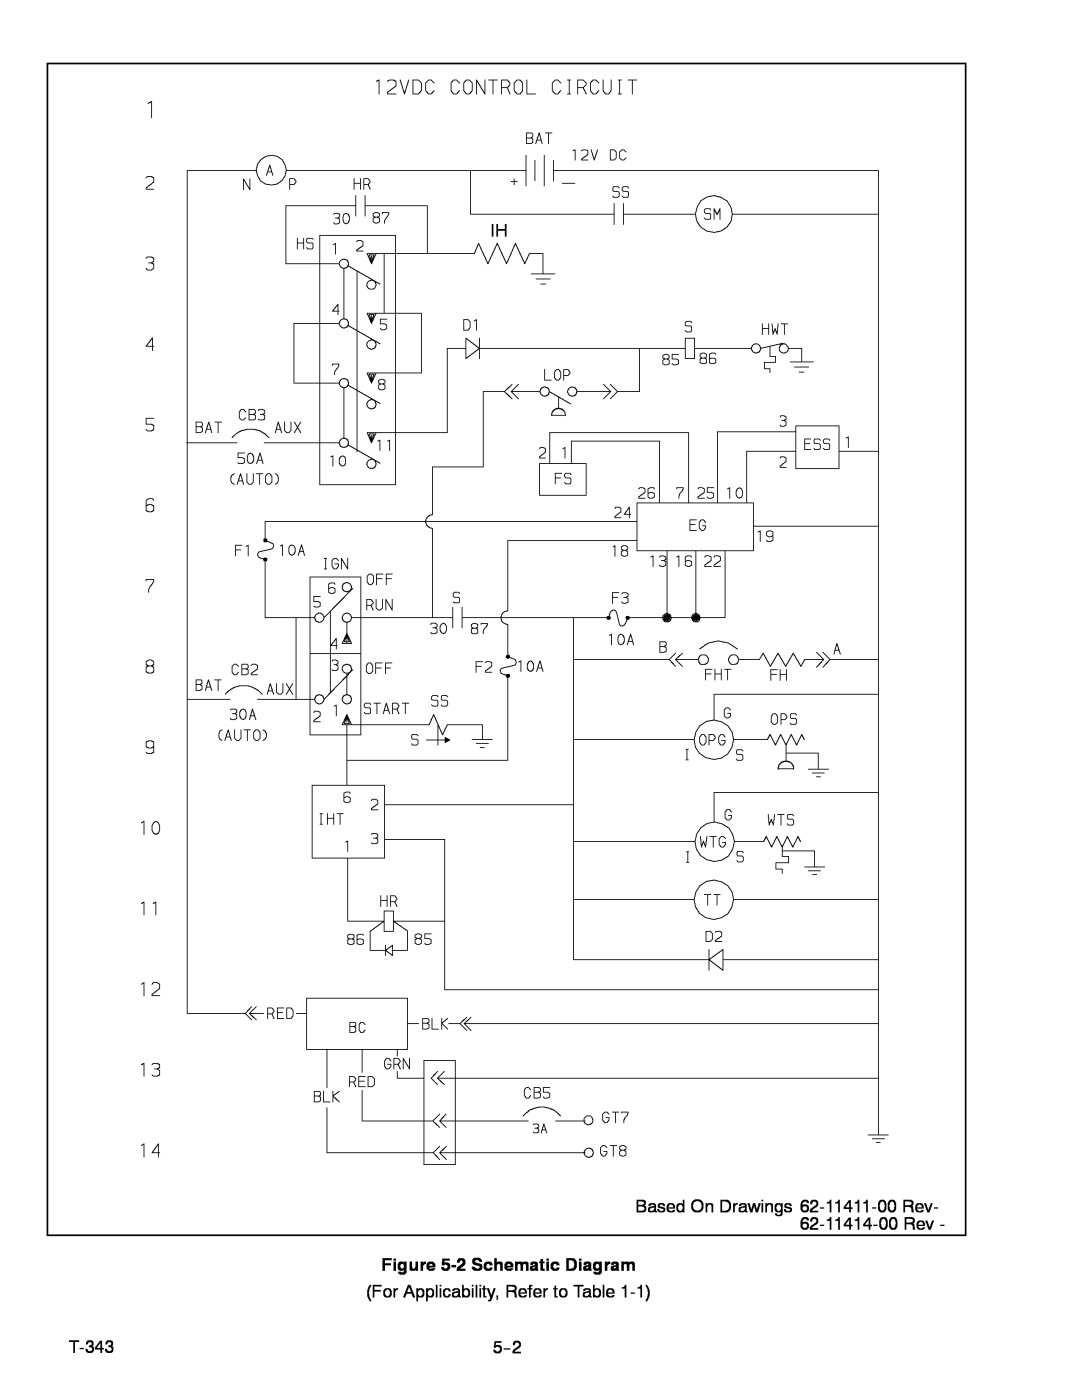 Carrier 69UG15 2 Schematic Diagram, Based On Drawings 62-11411-00 Rev, 62-11414-00 Rev, For Applicability, Refer to Table 